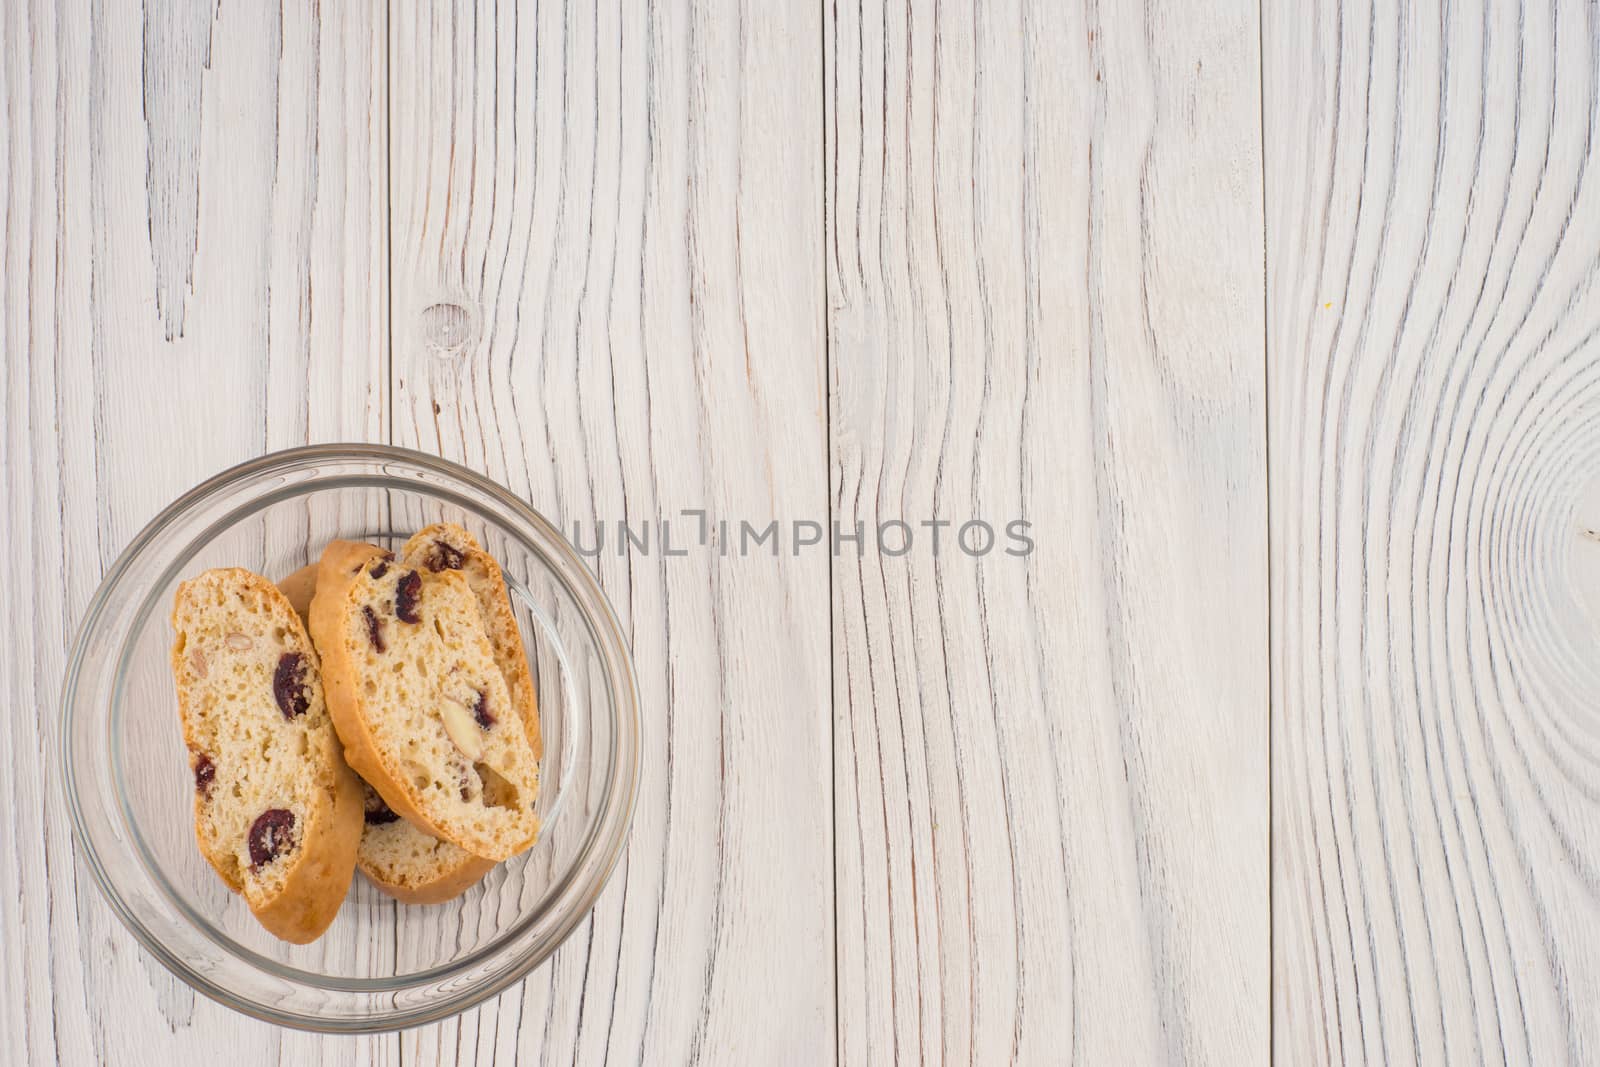 Biscuits in a glass bowl on old white wooden table. Top view.